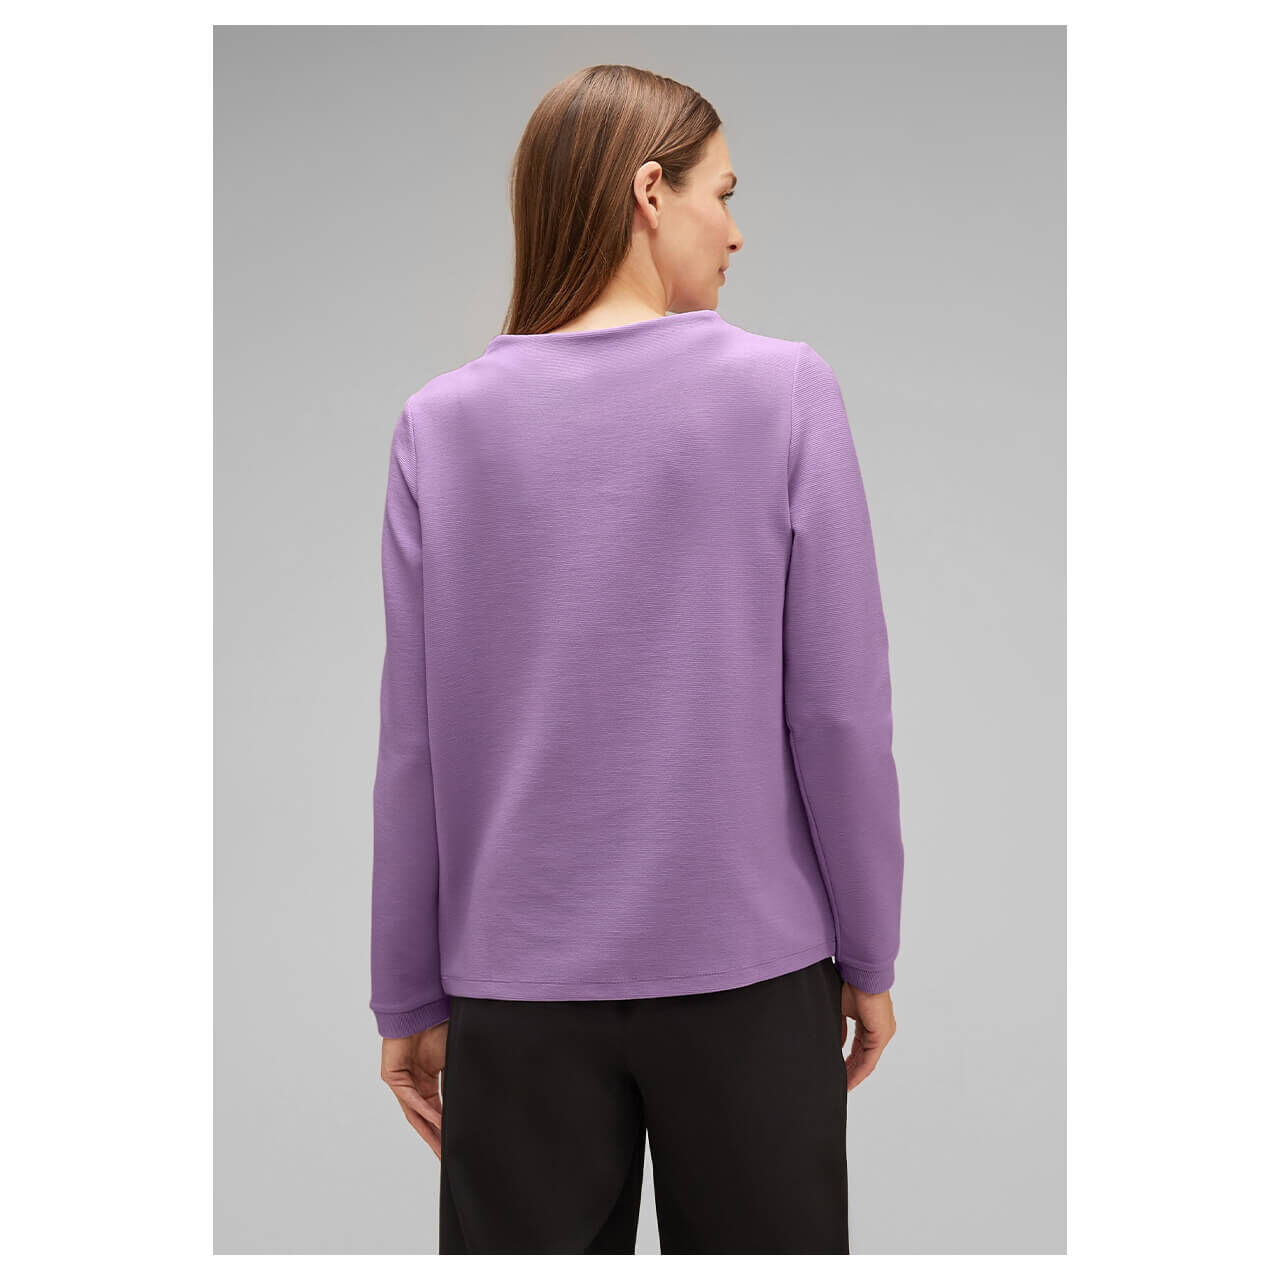 Street One Damen Pullover Turtle neck soft pure lilac